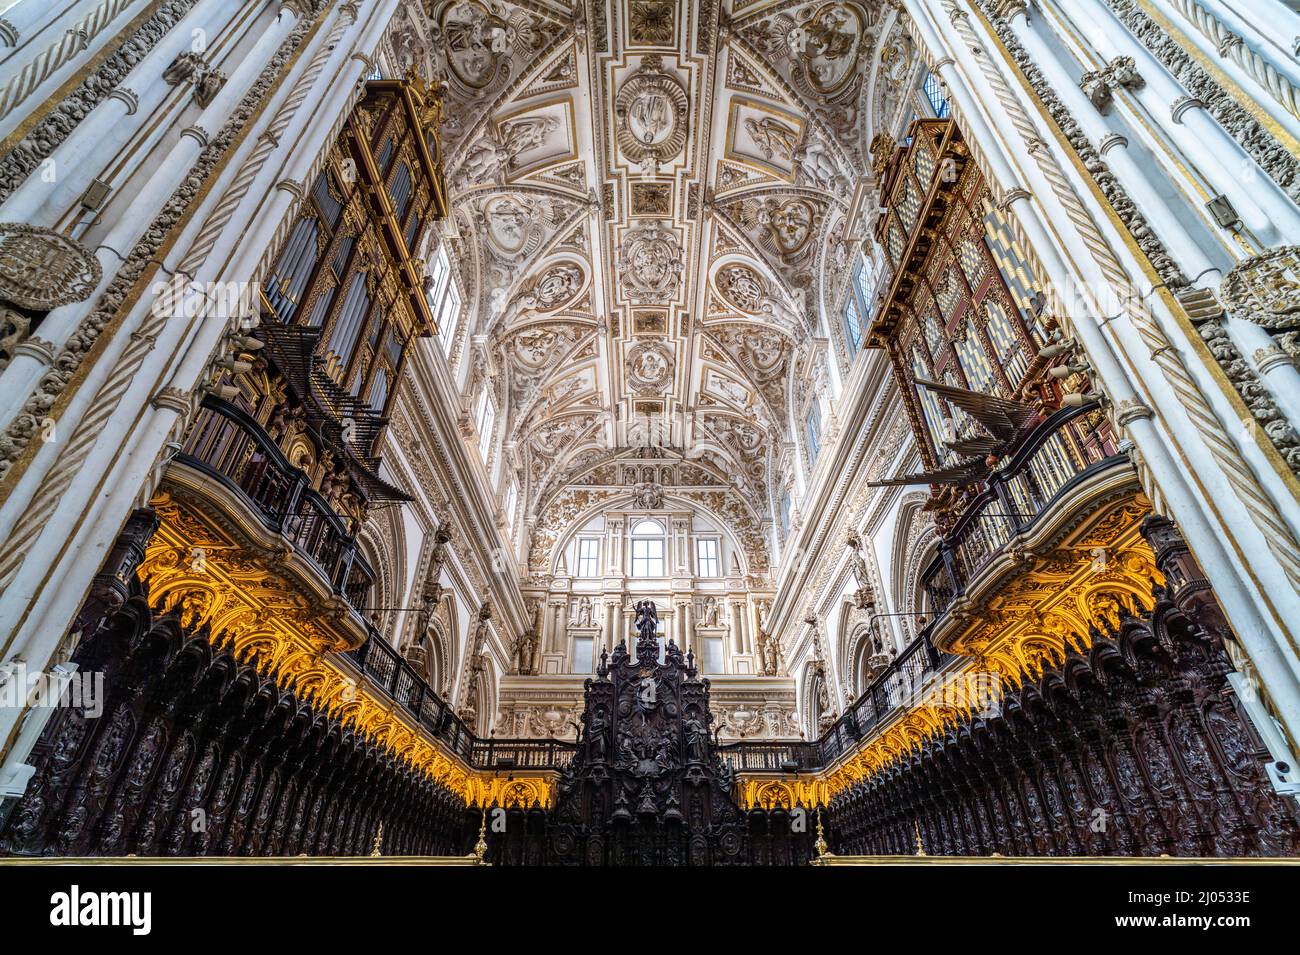 Orgel und Chor im Innenraum der Kathedrale - Mezquita - Catedral de Córdoba in Cordoba, Andalusien, Spanien  |  Organ and choir of the Cathedral -  Me Stock Photo